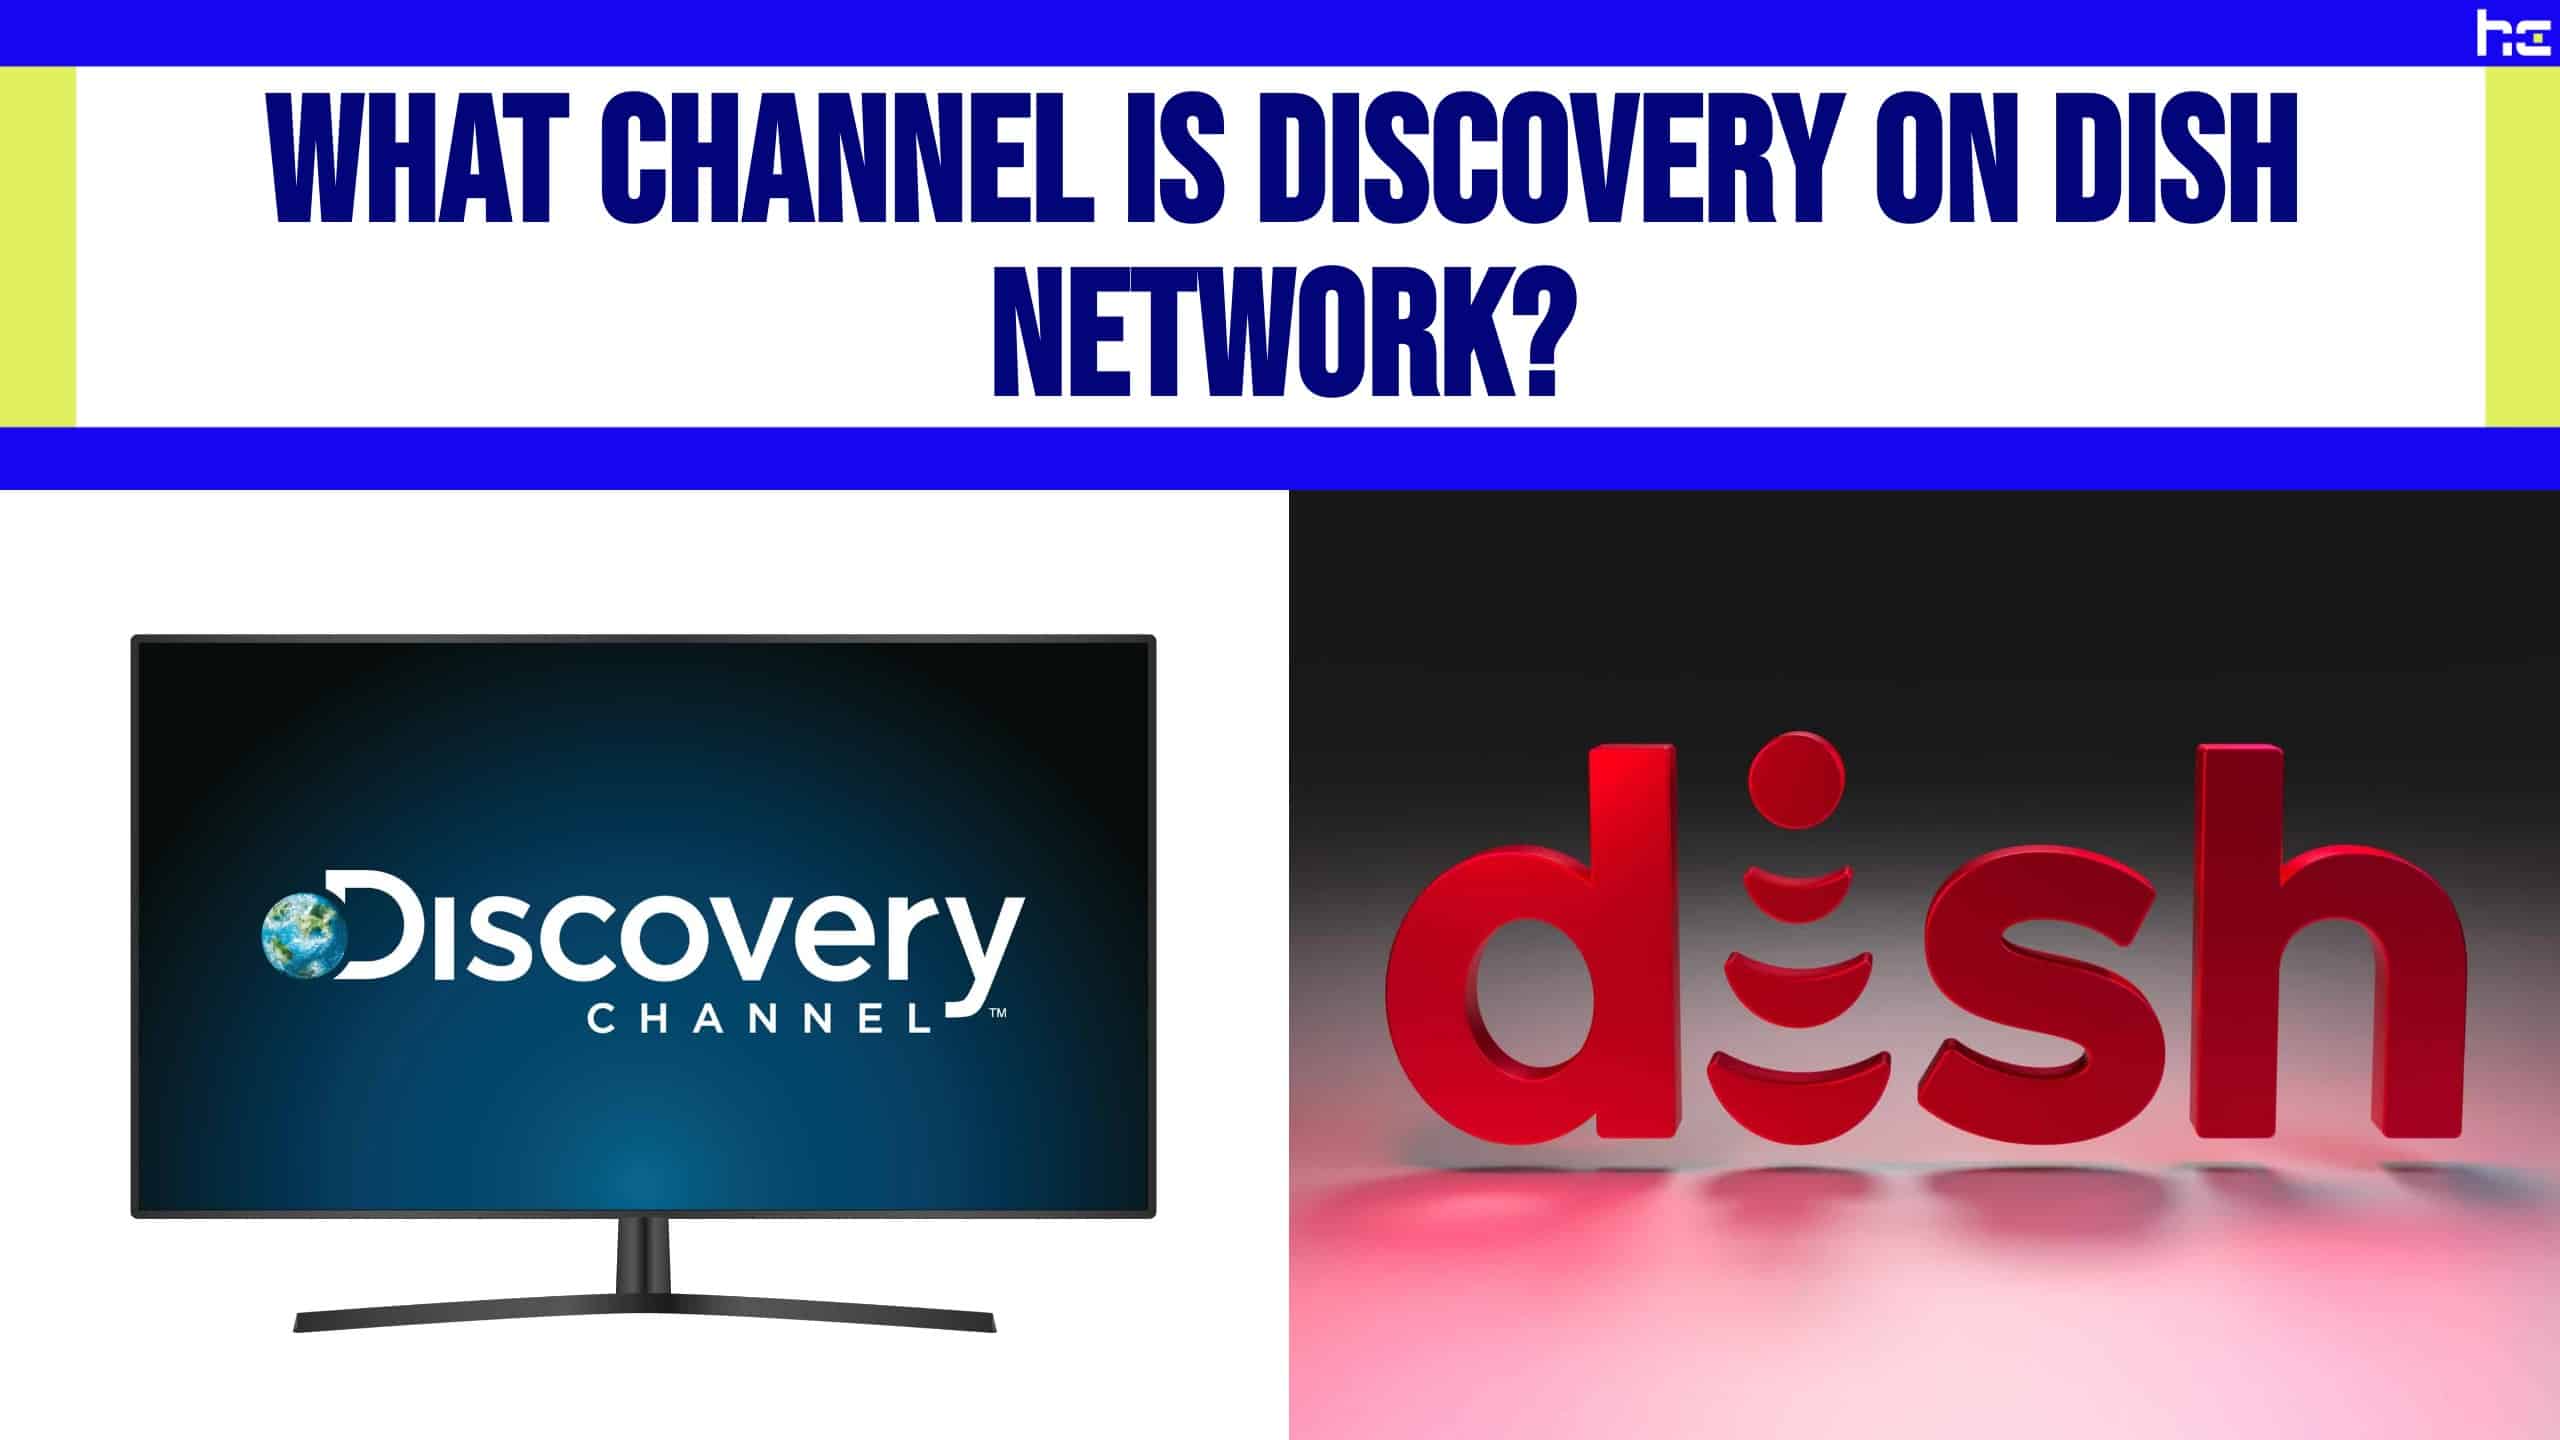 Discovery Channel logo beside DISH Network logo.